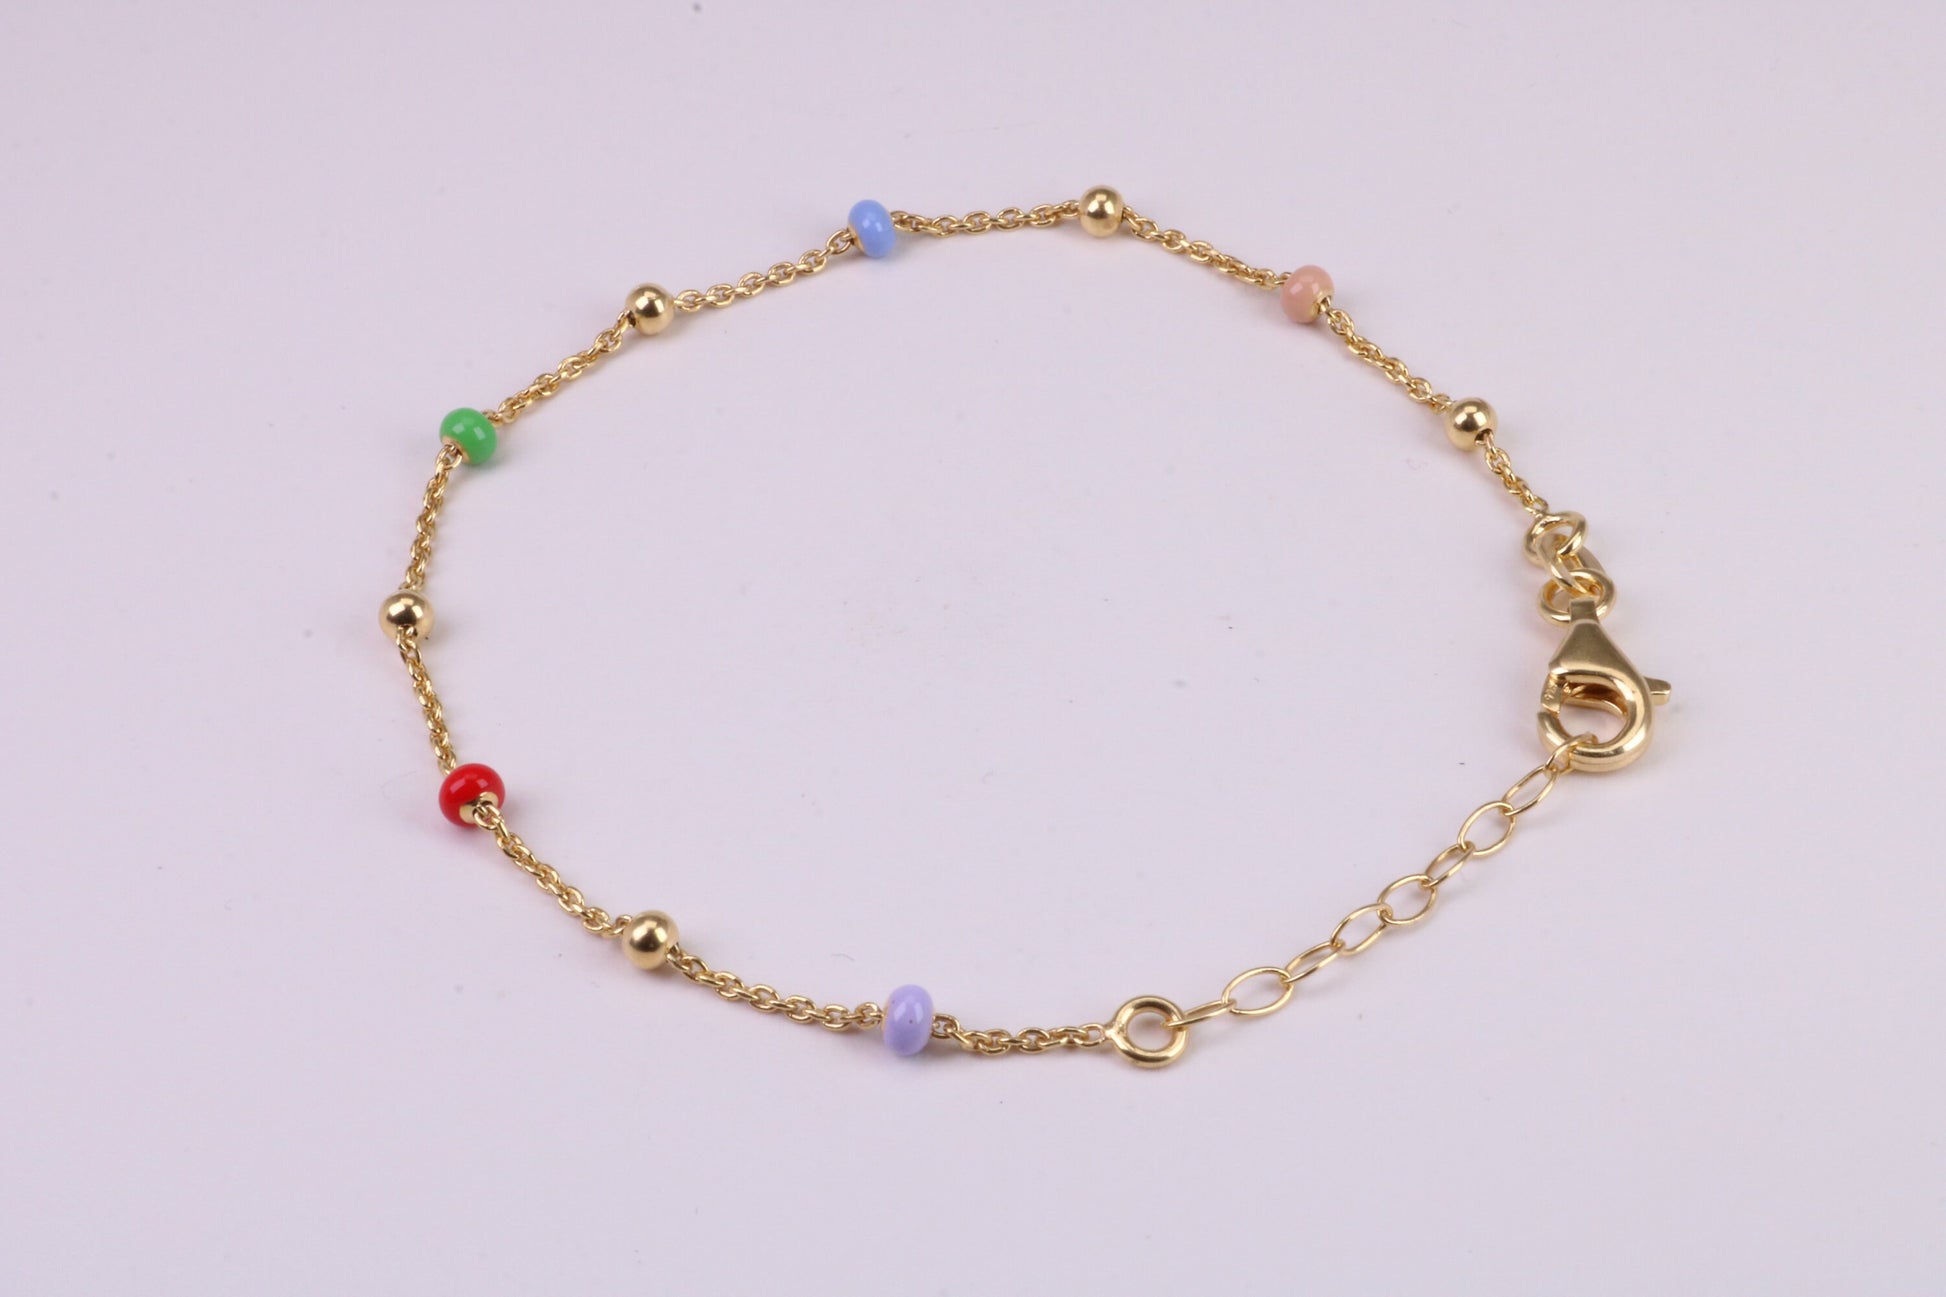 Dainty Rainbow Bracelet, With Length Adjustable Chain, Made from solid Sterling Silver and Further 18ct Yellow Gold Plated